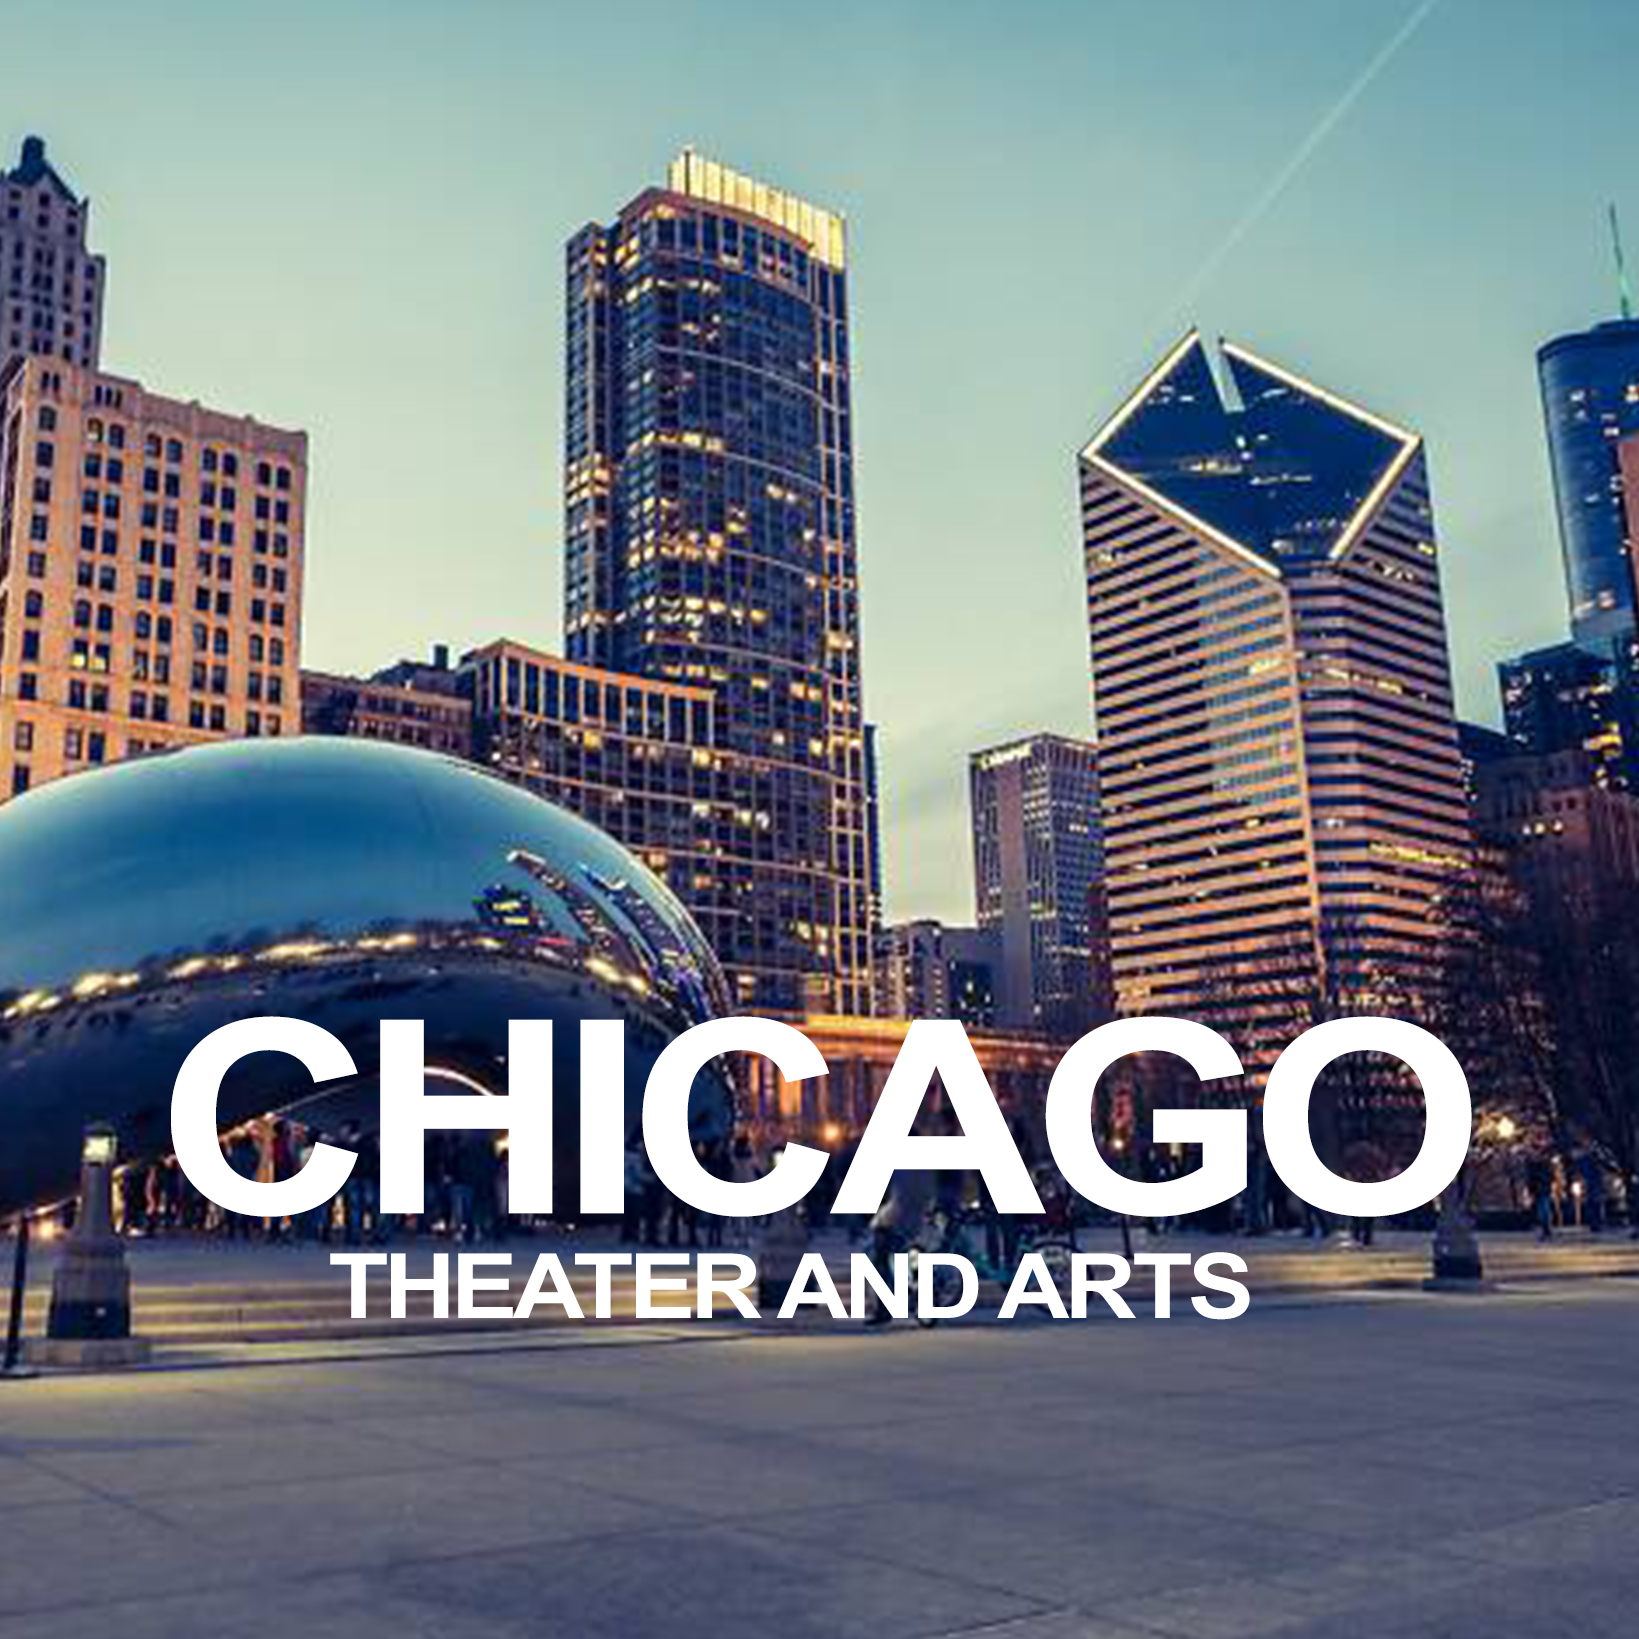 Chicago Theater and Arts (2018)